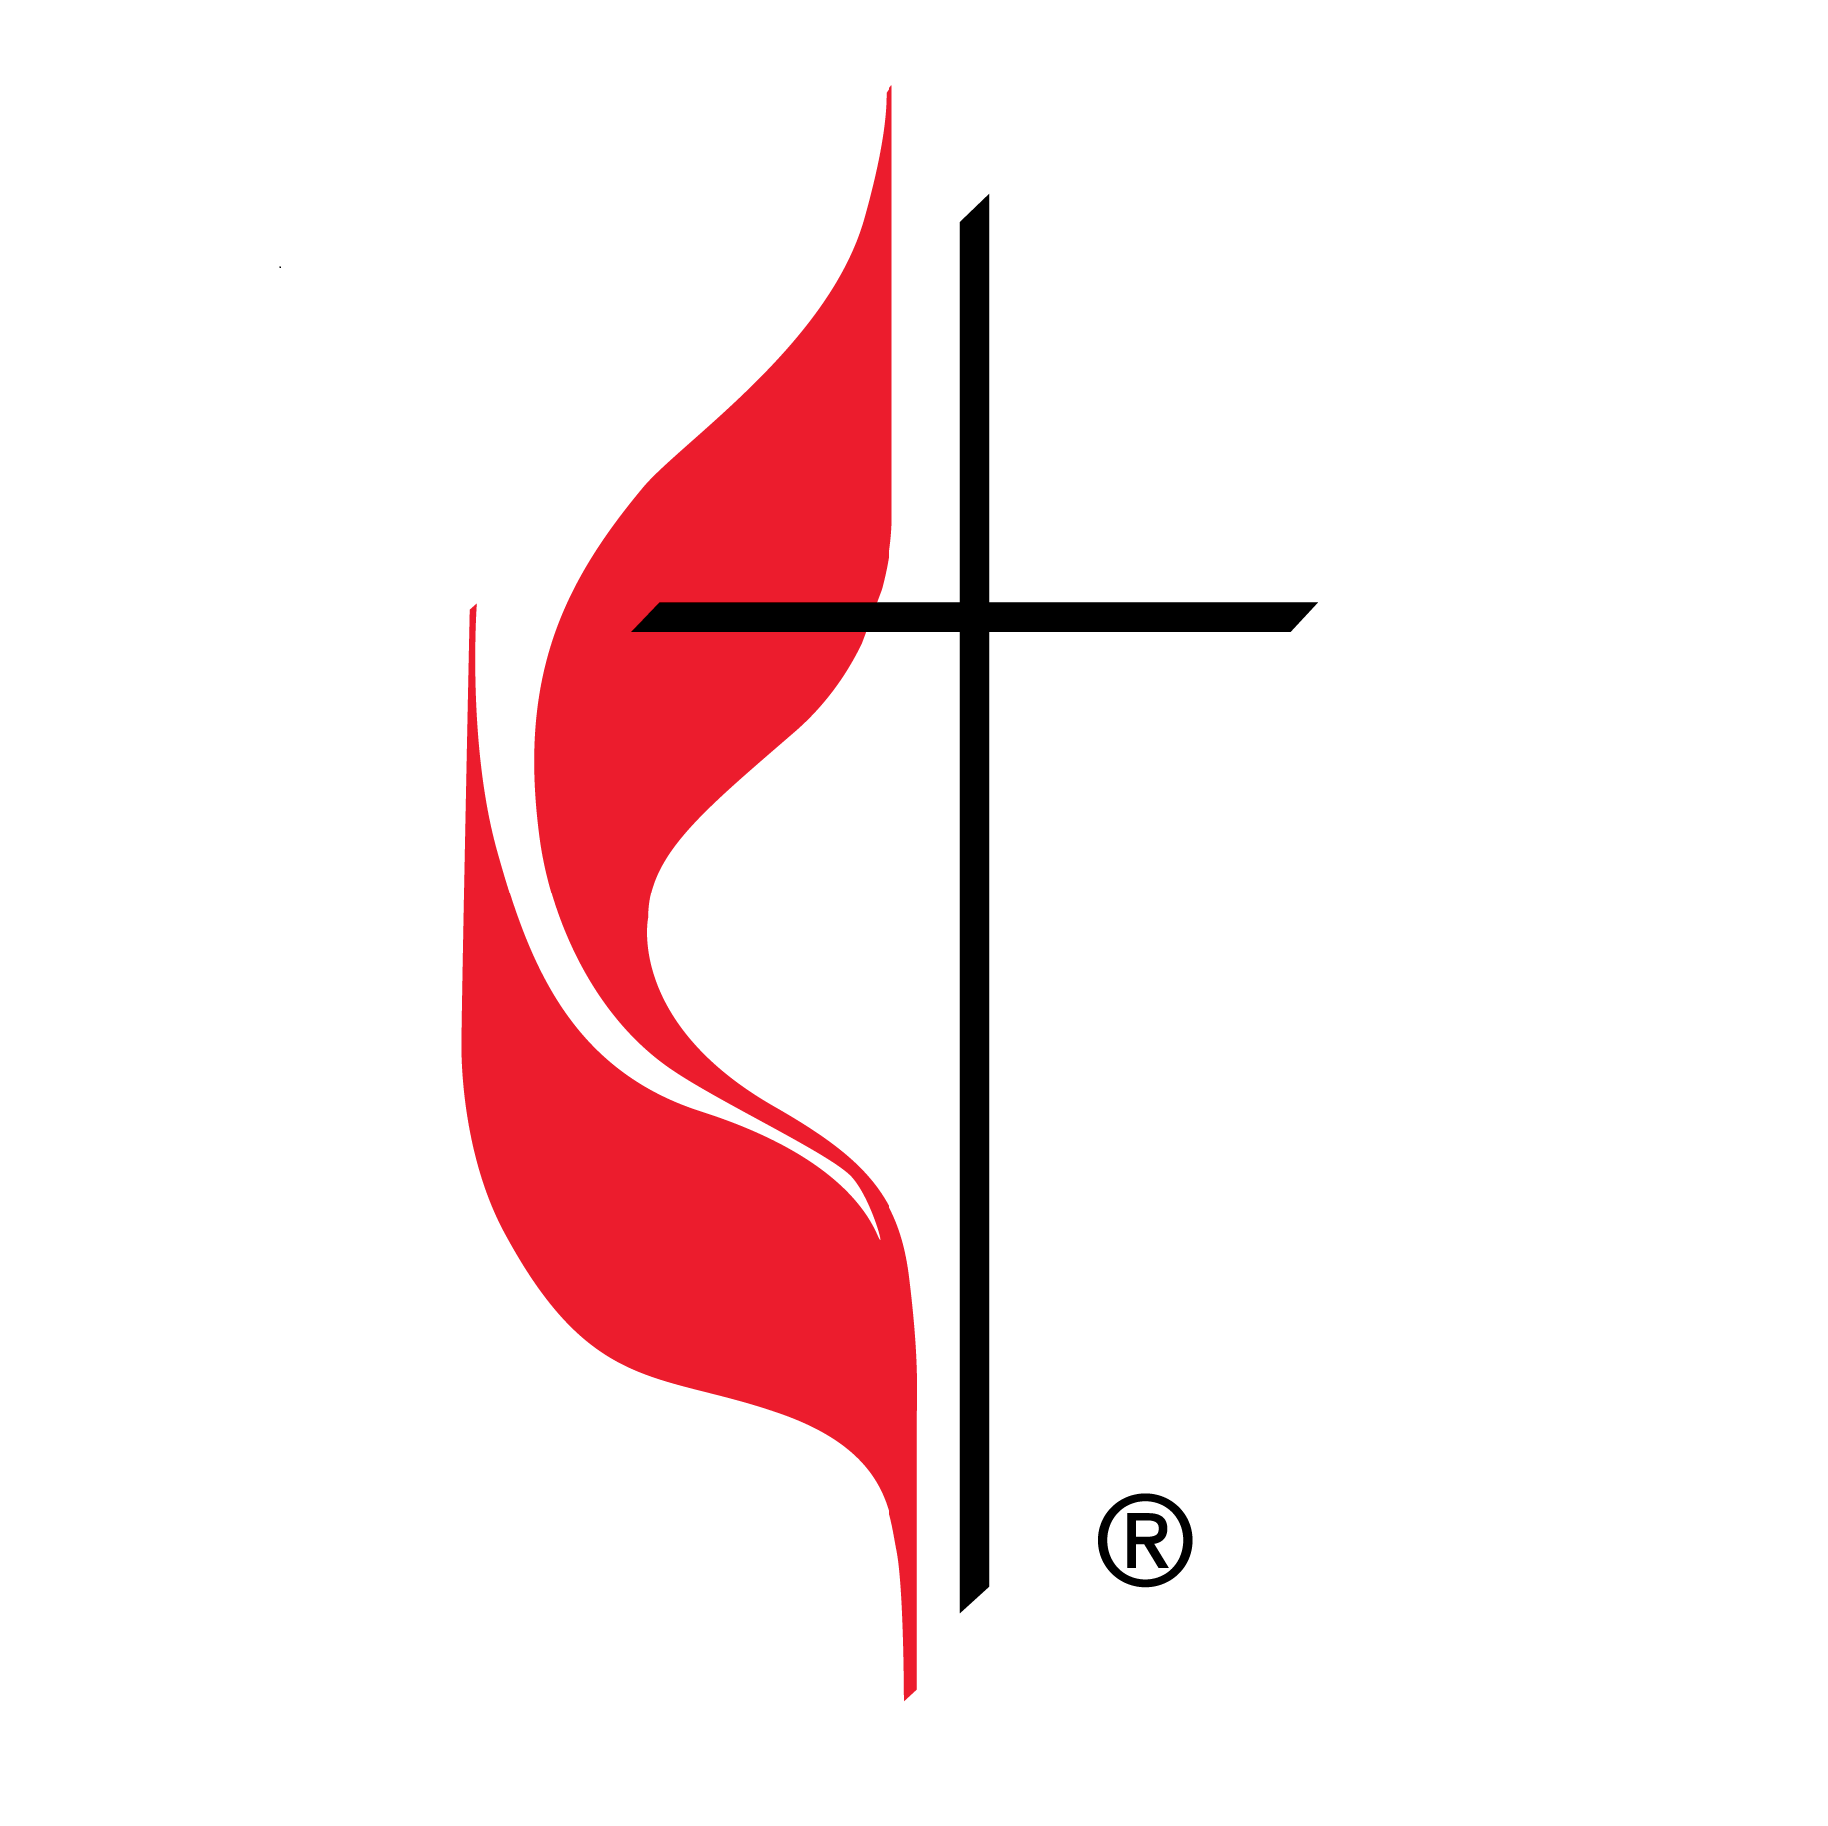 The Cross and Flame is a registered trademark and the use is supervised by the General Council on Finance and Administration of The United Methodist Church. Permission to use the Cross and Flame must be obtained from the General Council on Finance and Administration of The United Methodist Church: